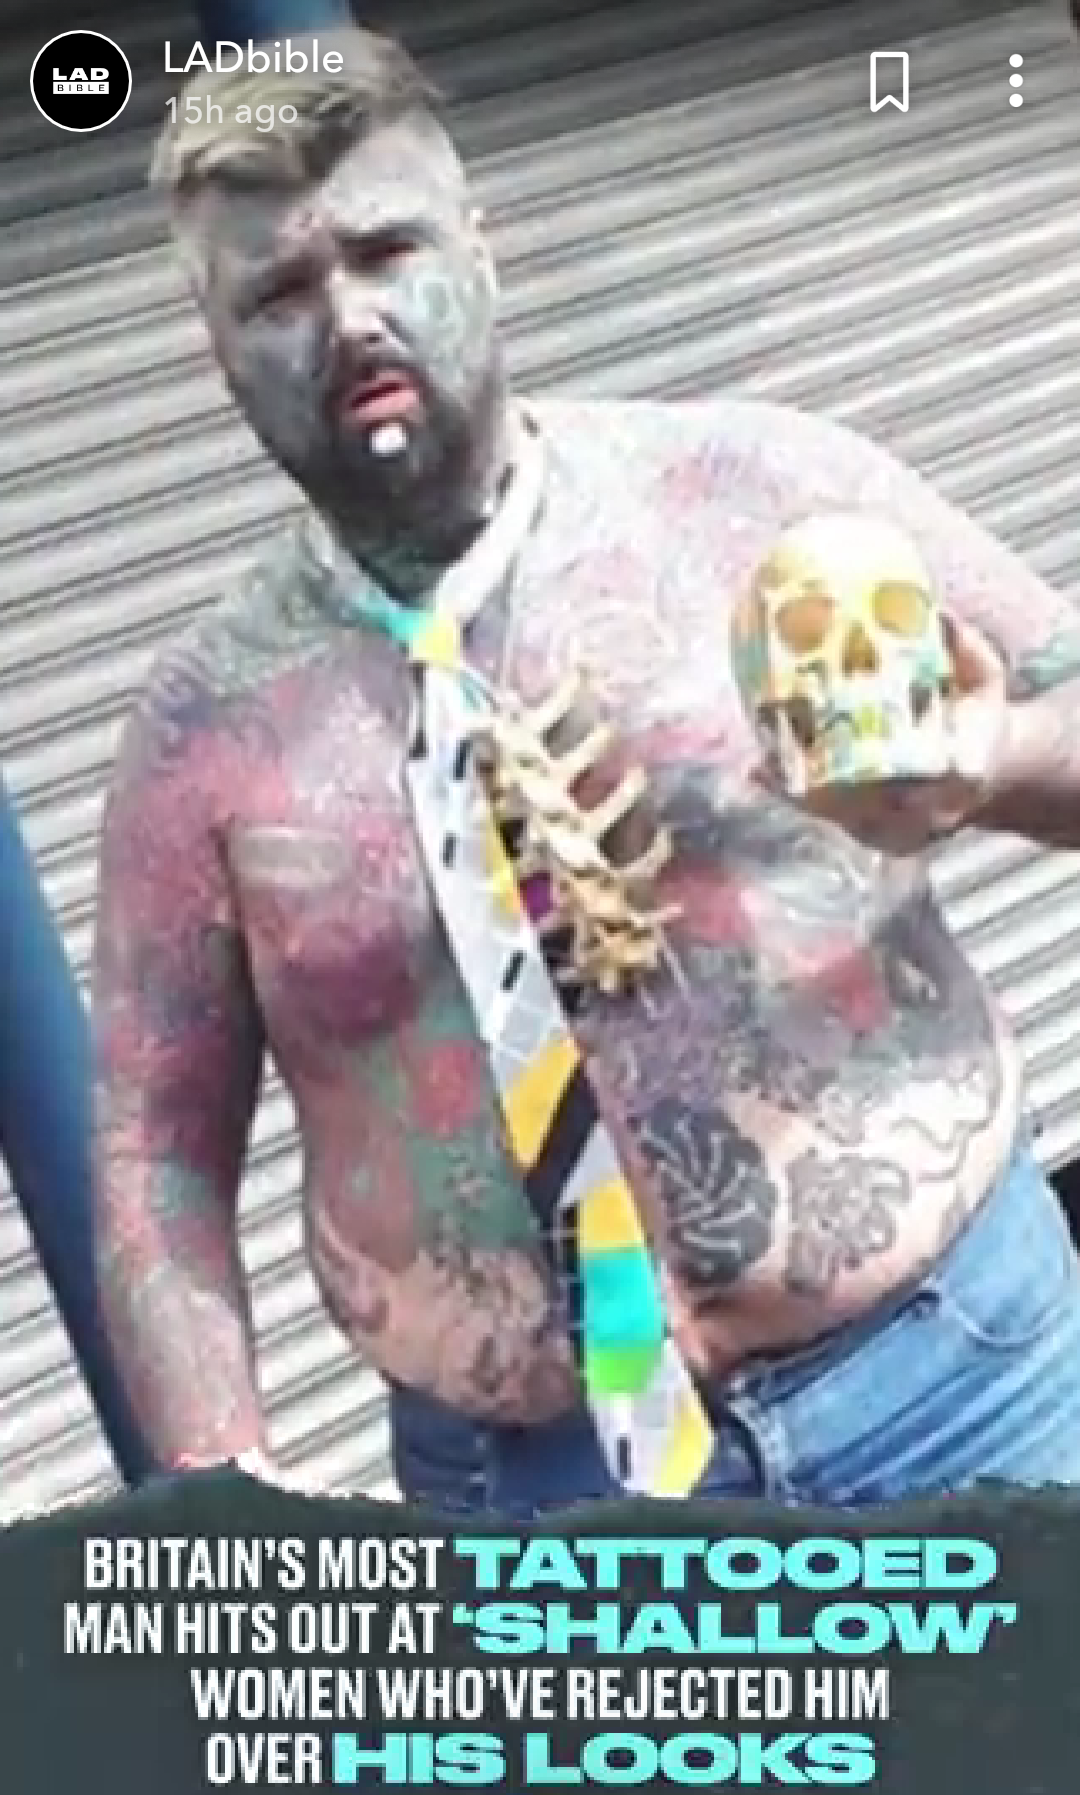 arm - M LADbible 15h ago Britain'S Most Tattooed Man Hits Out At Shallow Women Who'Ve Rejected Him Over His Looks